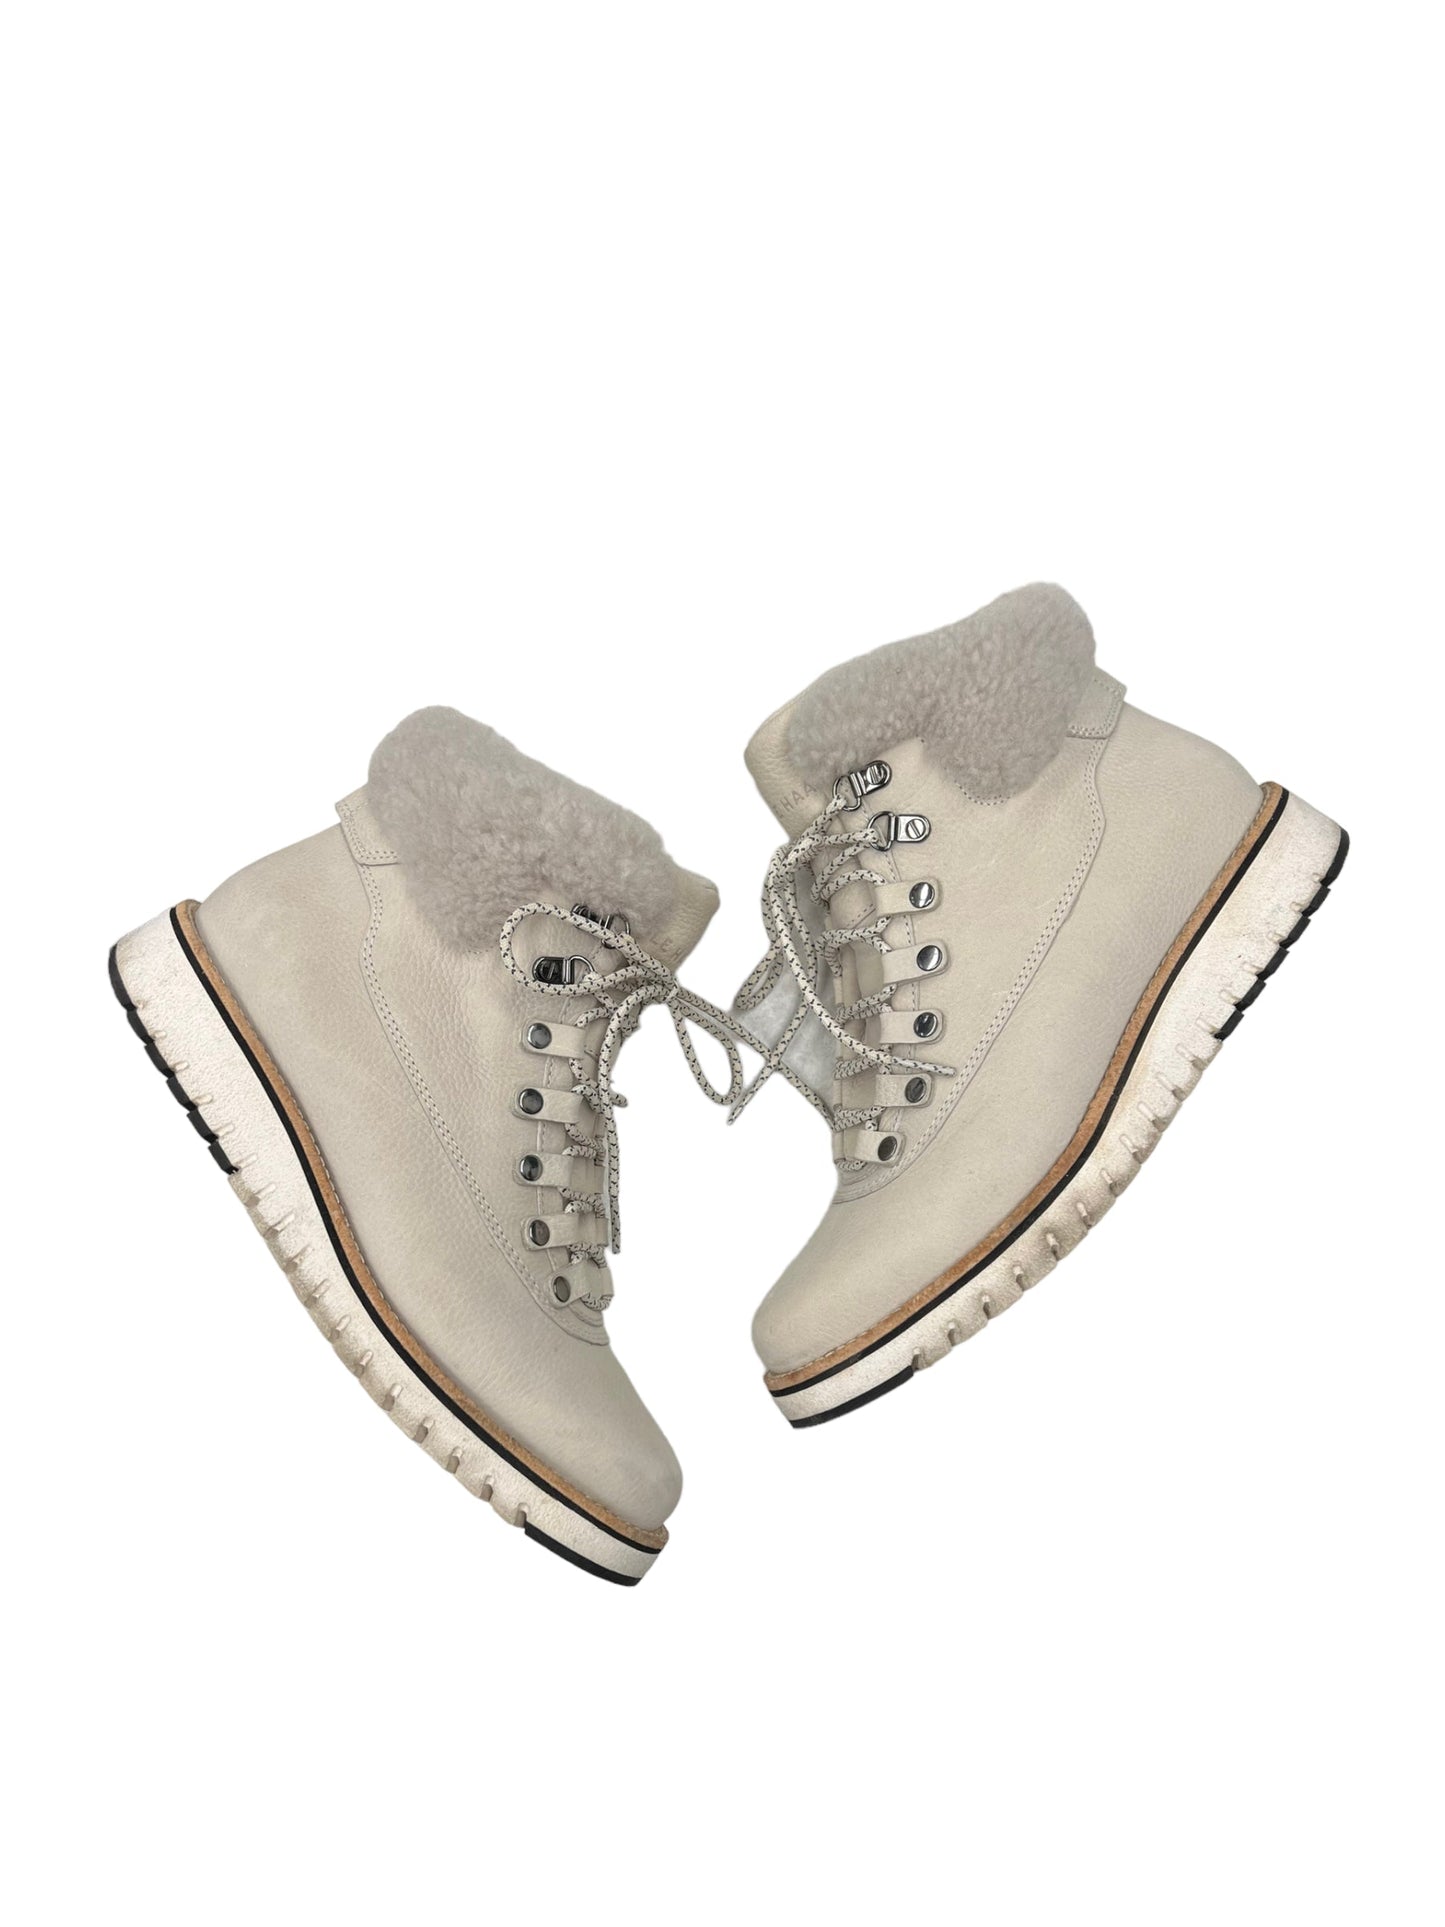 Boots Combat By Cole-haan  Size: 7.5